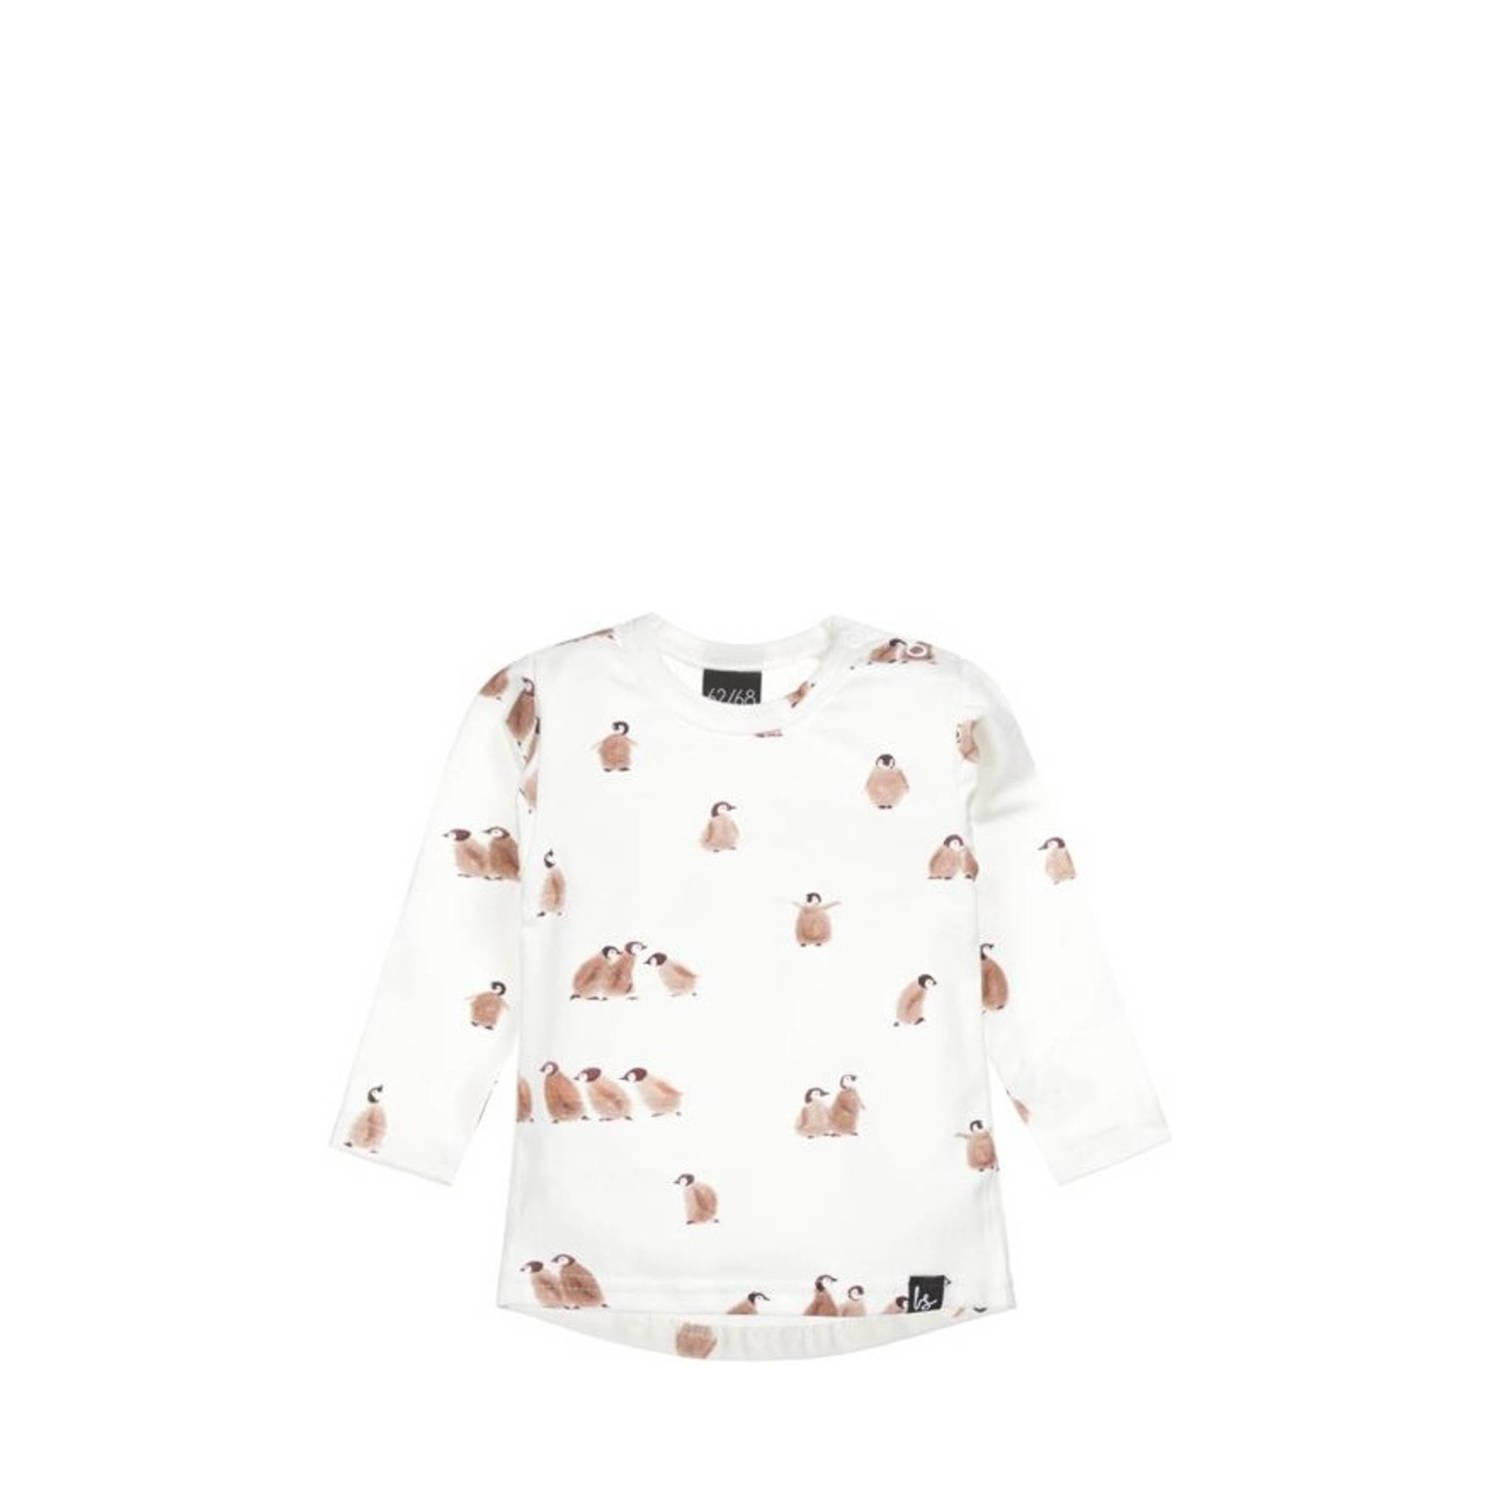 Babystyling baby longsleeve met all over print wit bruin